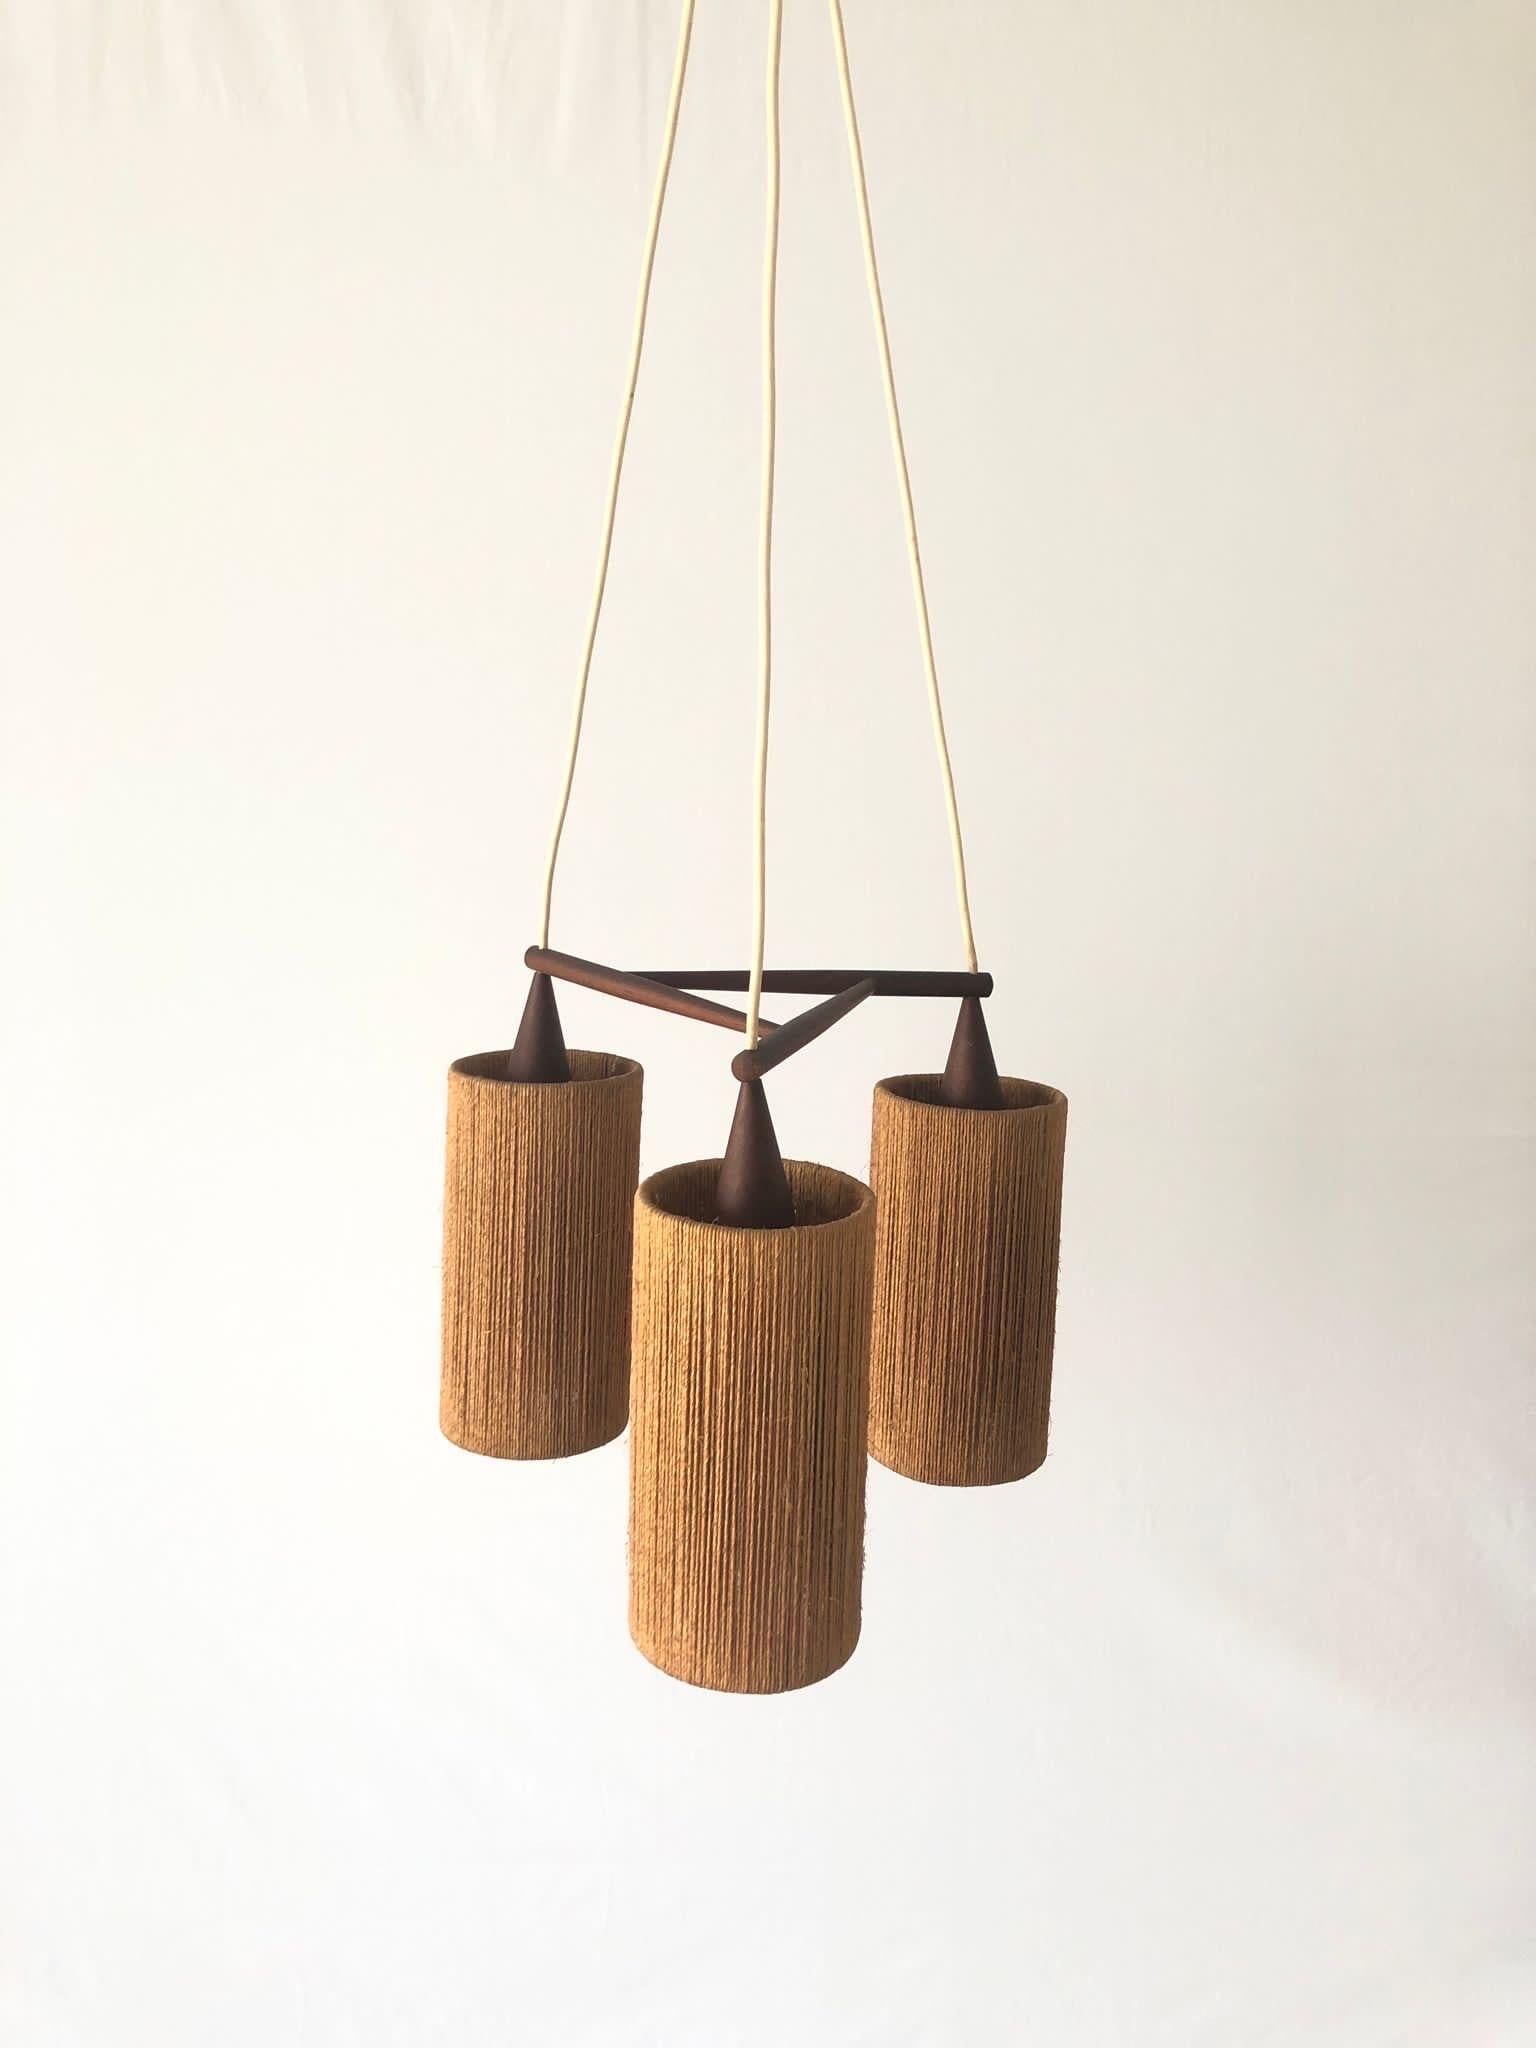 Raffia Bast and Teak Triple Pendant Lamp by Temde, 1960s, Germany

Elegant and minimal design hanging lamp

Lampshade is in good condition and very clean. 
This lamp works with 3x E14 light bulb. 
Wired and suitable to use with 220V and 110V for all